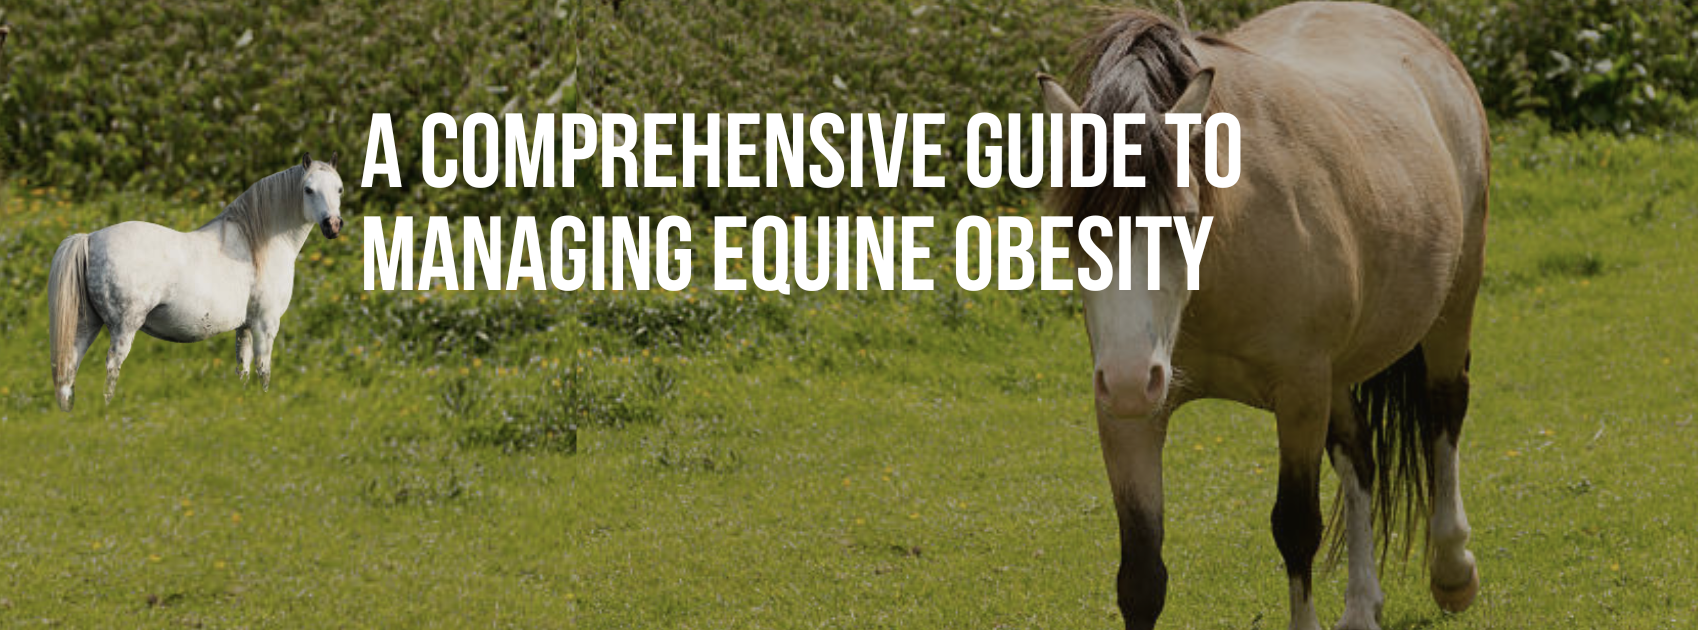 A Comprehensive Guide to Managing Equine Obesity